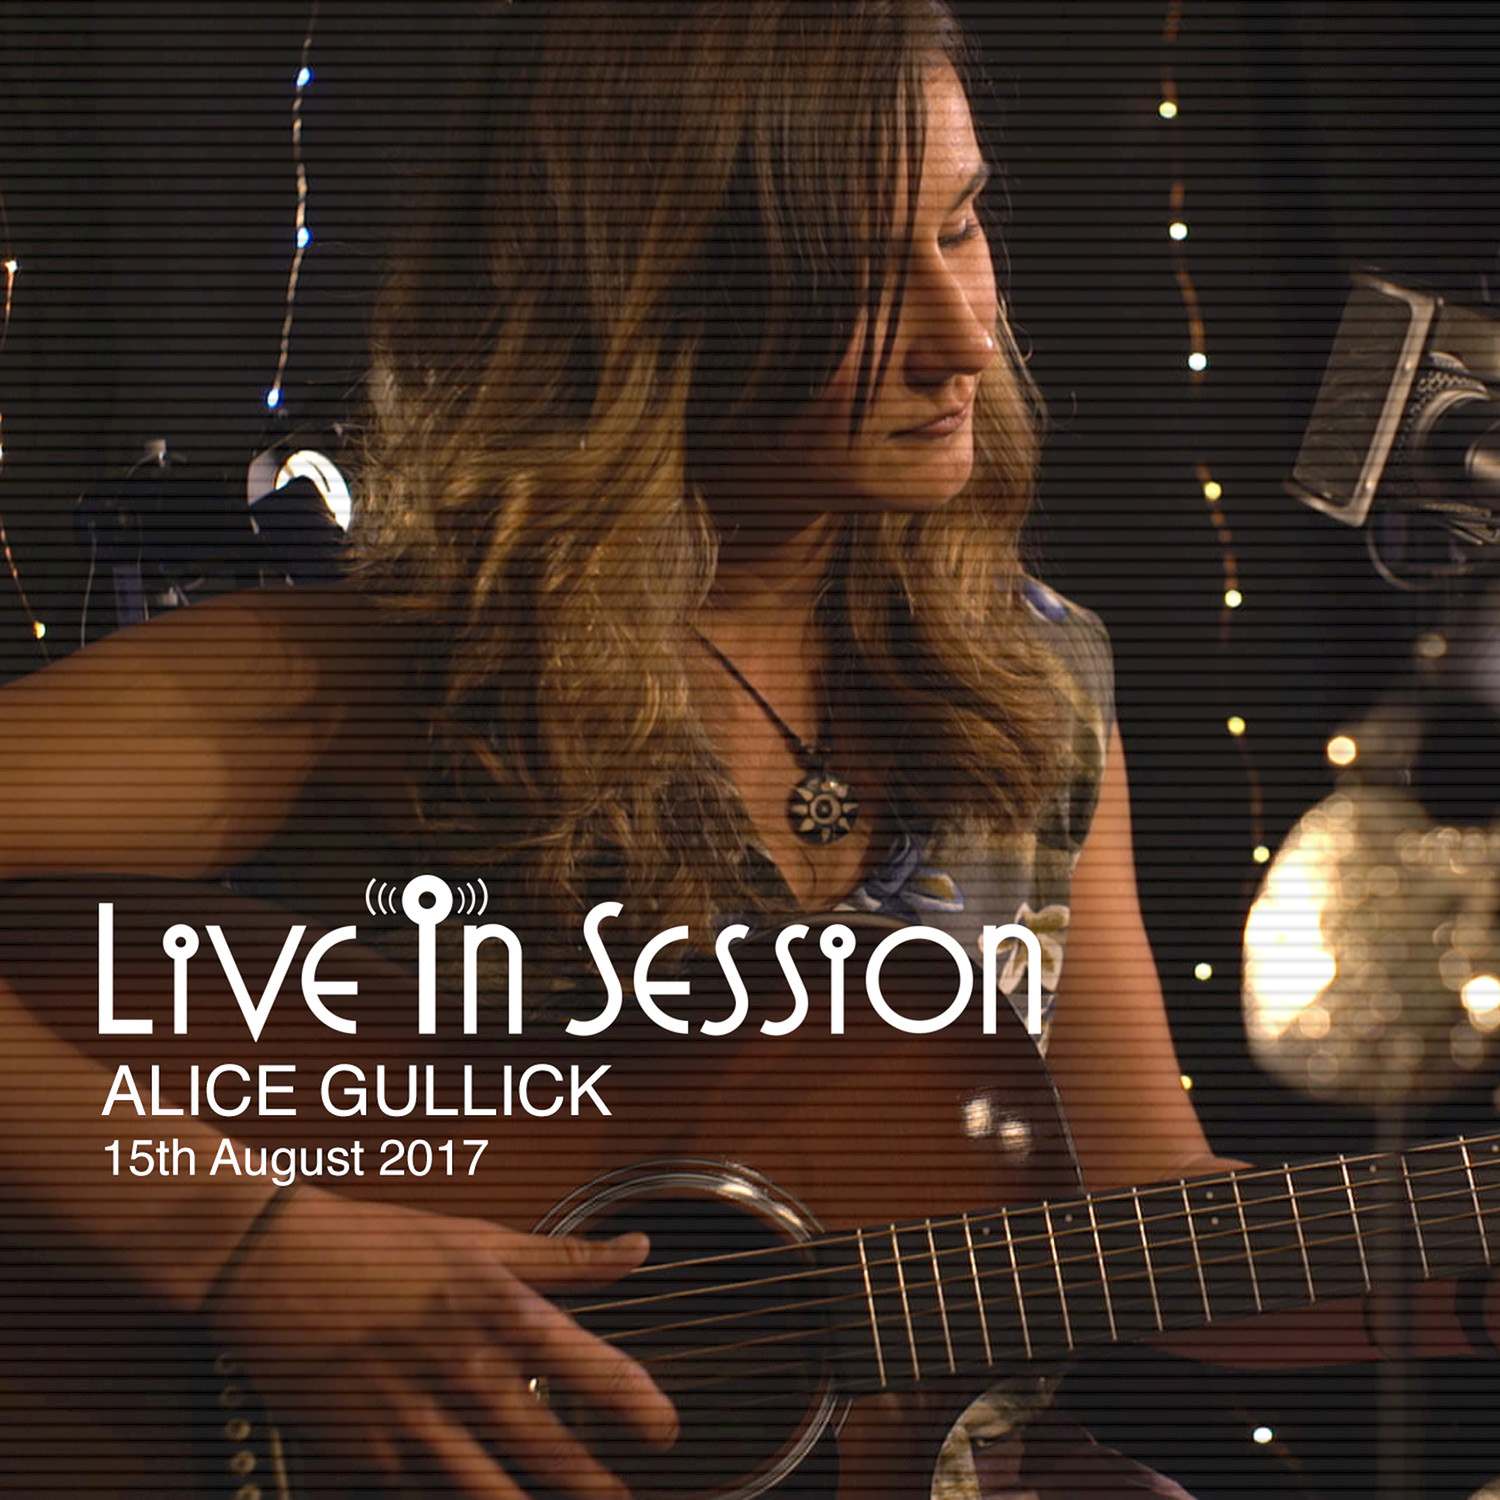 Live in Session with Alice Gullick (15th August 2017)